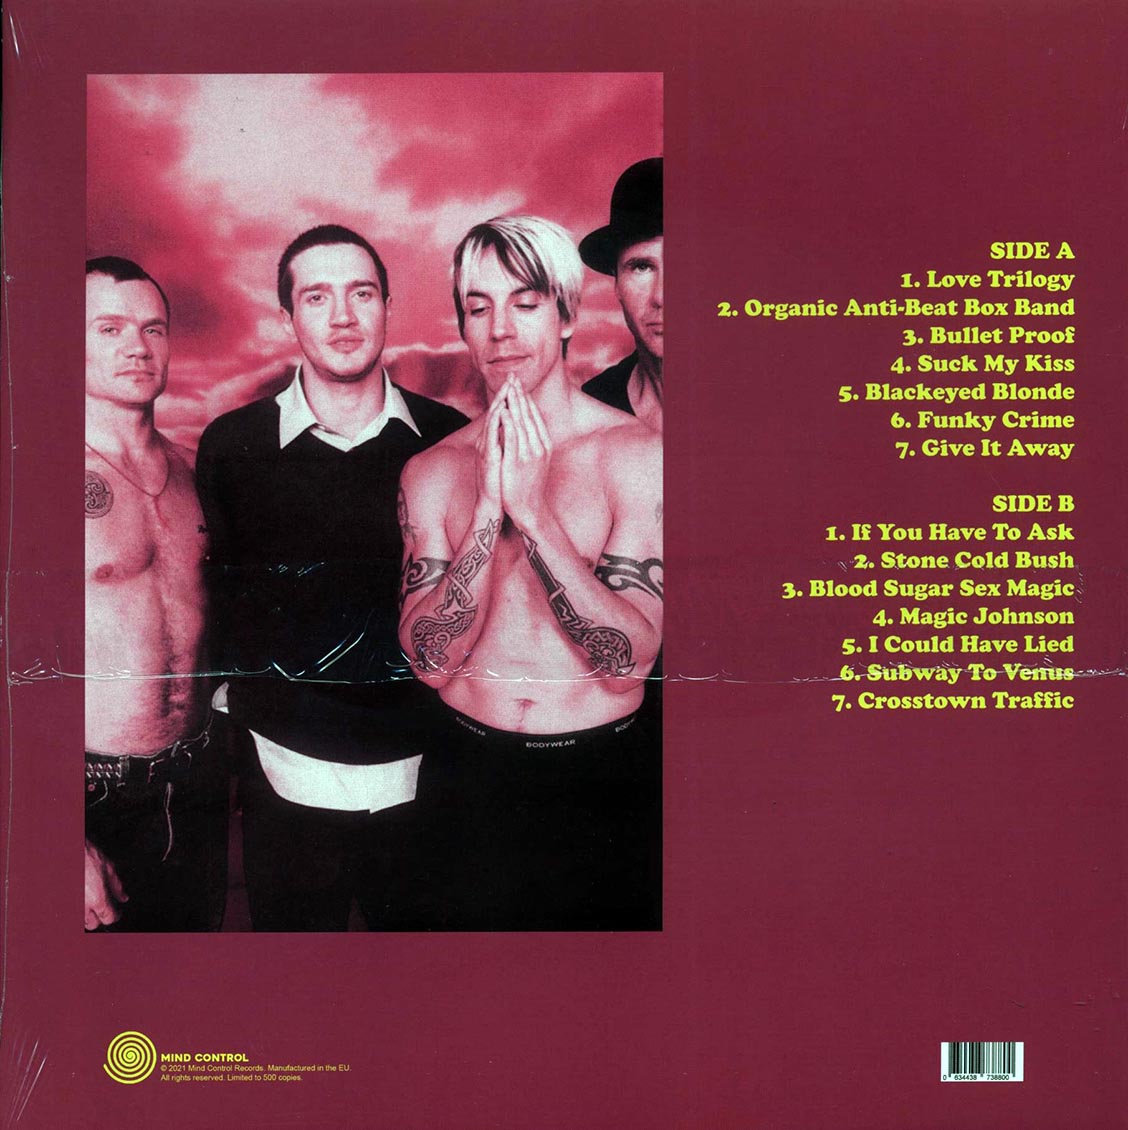 Red Hot Chili Peppers - Live At The Pat O'Brien Pavillion, Del Mar, CA 1991 Westwood One FM Broadcast (ltd. 500 copies made) - Vinyl LP, LP